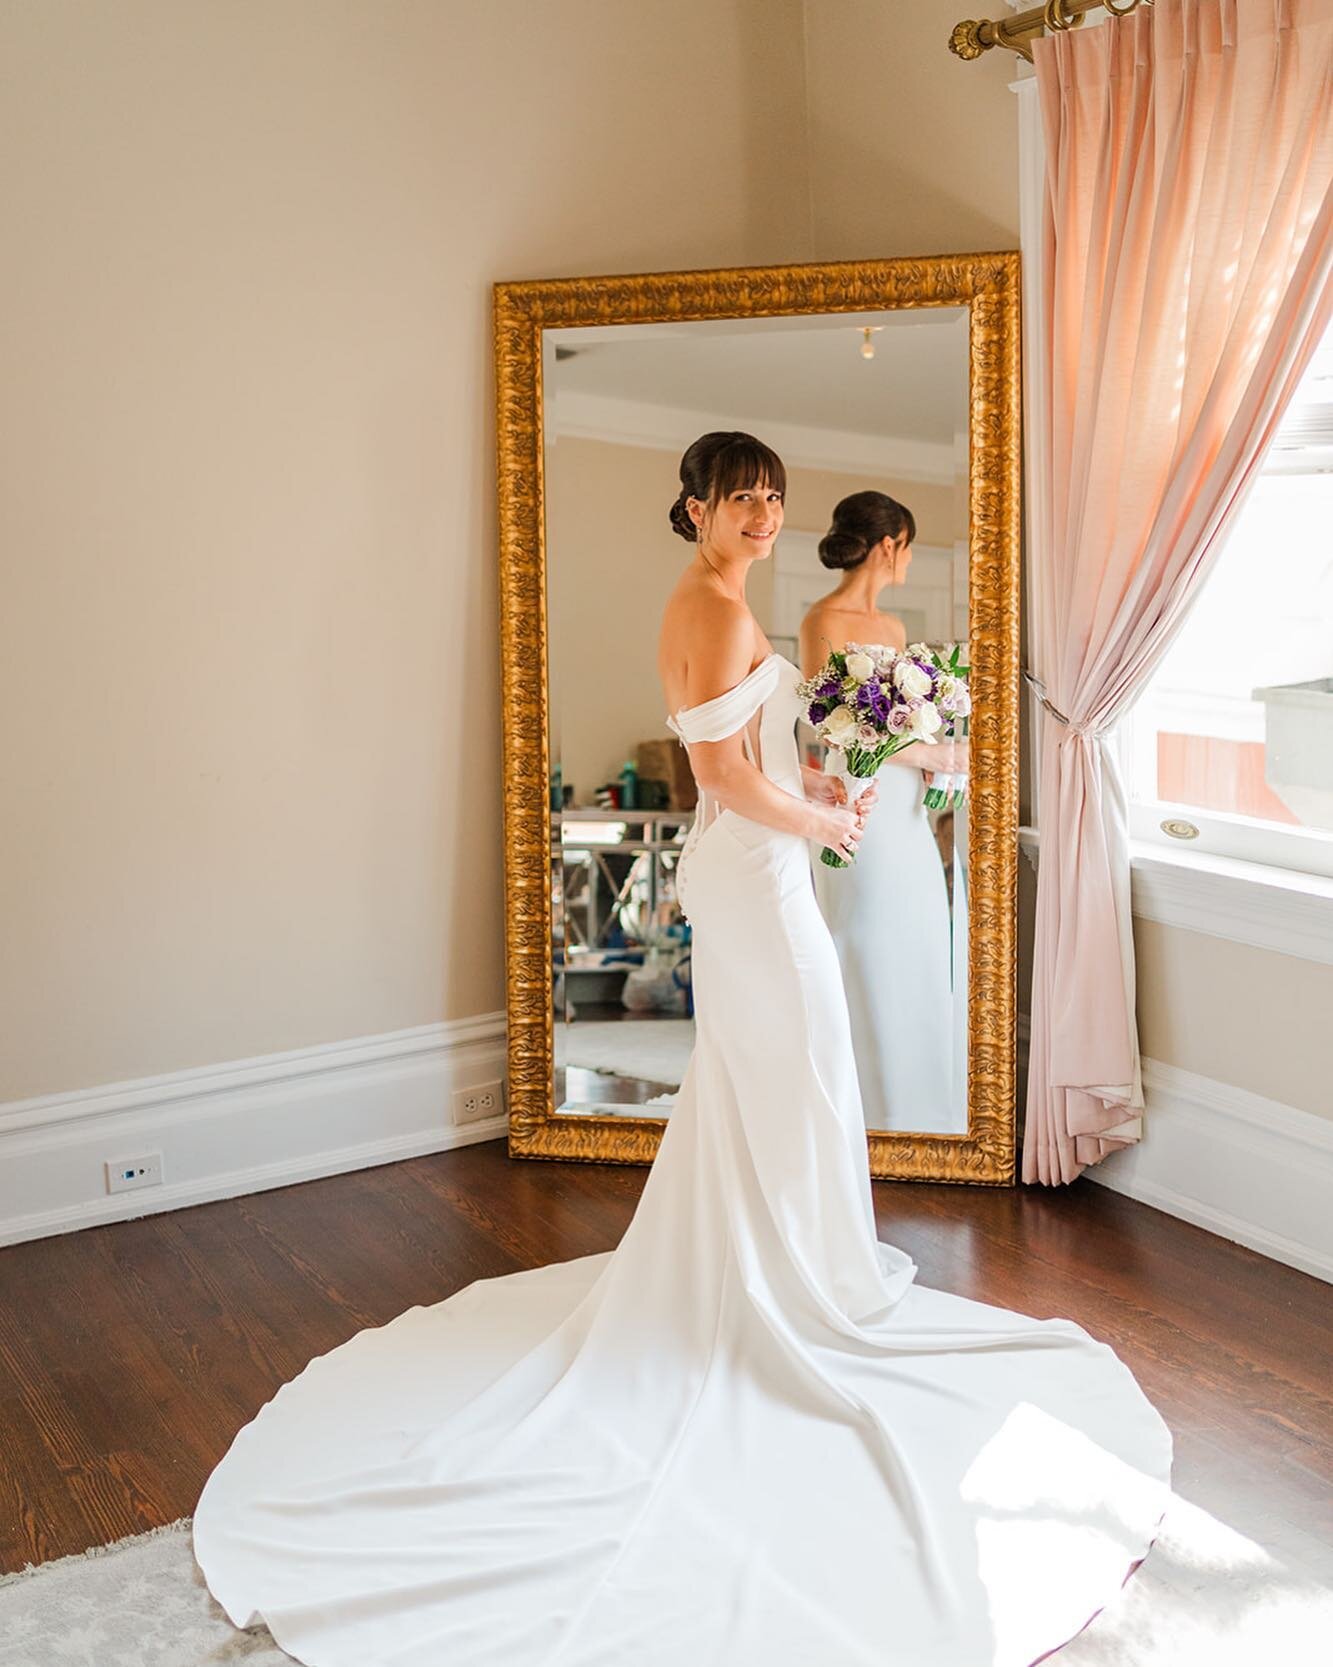 Our beautiful bride Devon looking as classic as ever! For her wedding day, we created a natural makeup look to simply bring out her best features and paired it with an elegant low bun that suited her bangs so well!

If you are a minimalist, be sure t